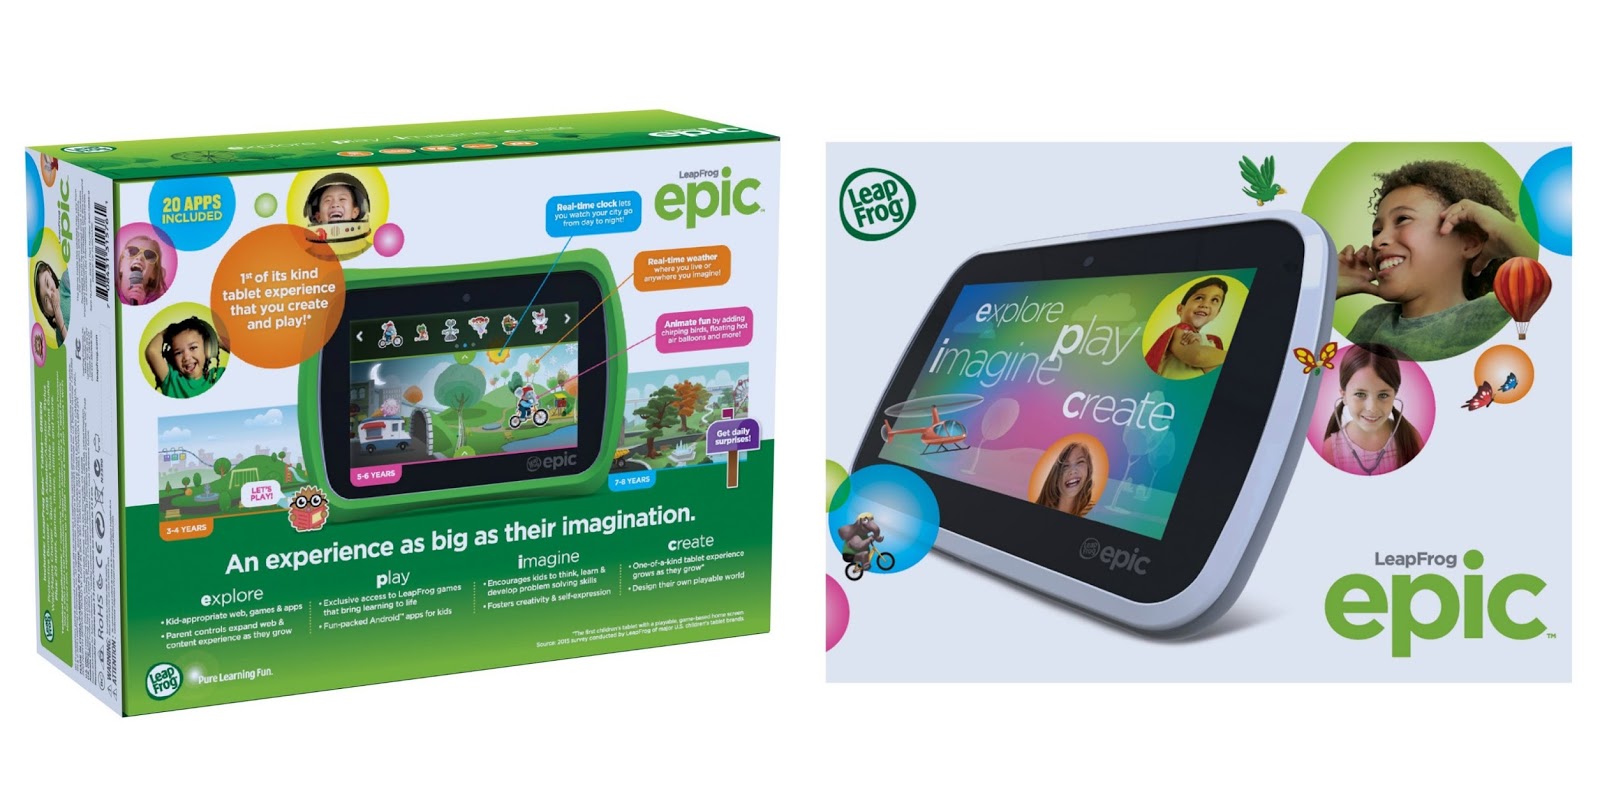 LeapFrog Epic - 2015 Holiday Gift Guide Feature - The Momma Diaries